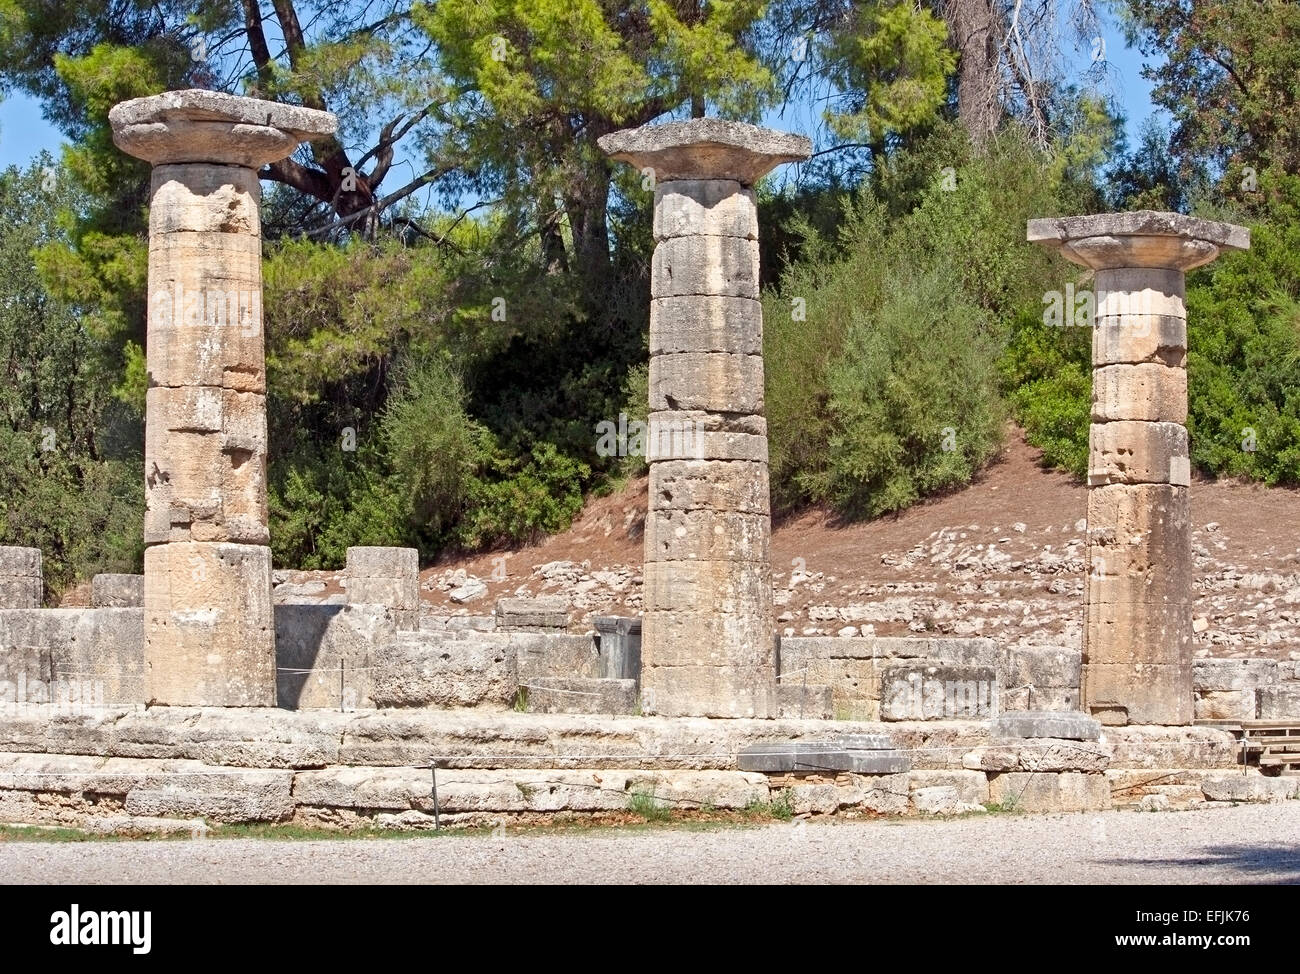 Doric columns in the ruins of the Temple of Hera , Ancient Olympia, The Peloponnese, Greece Stock Photo